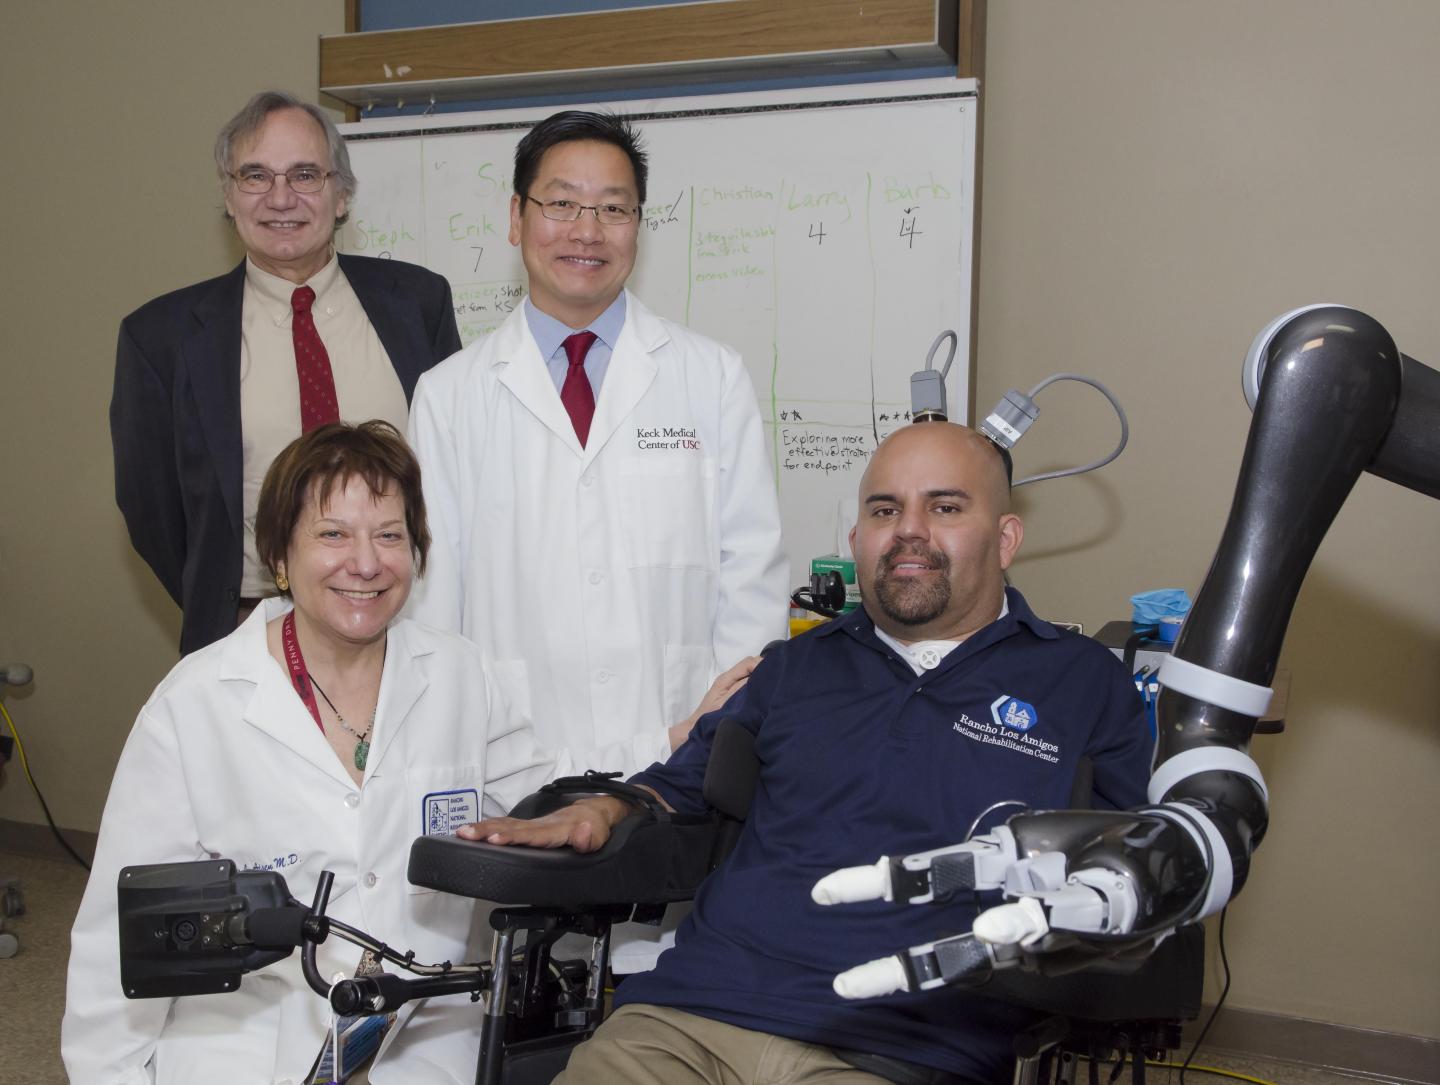 Caltech/USC Collaborates On Neuroprosthetic Clinical Study